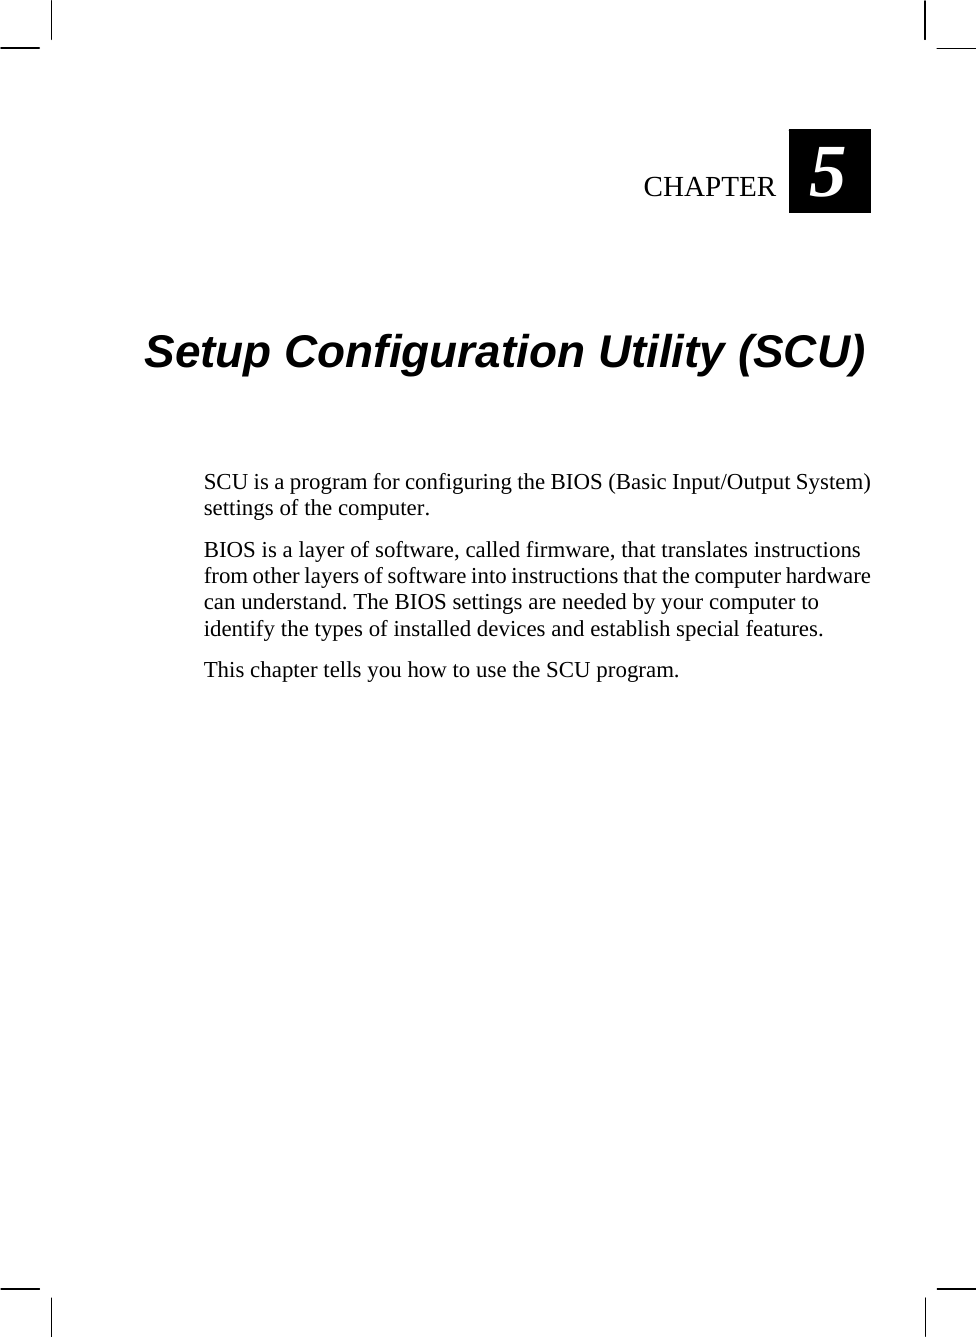  5CHAPTER   Setup Configuration Utility (SCU) SCU is a program for configuring the BIOS (Basic Input/Output System) settings of the computer. BIOS is a layer of software, called firmware, that translates instructions from other layers of software into instructions that the computer hardware can understand. The BIOS settings are needed by your computer to identify the types of installed devices and establish special features. This chapter tells you how to use the SCU program.  